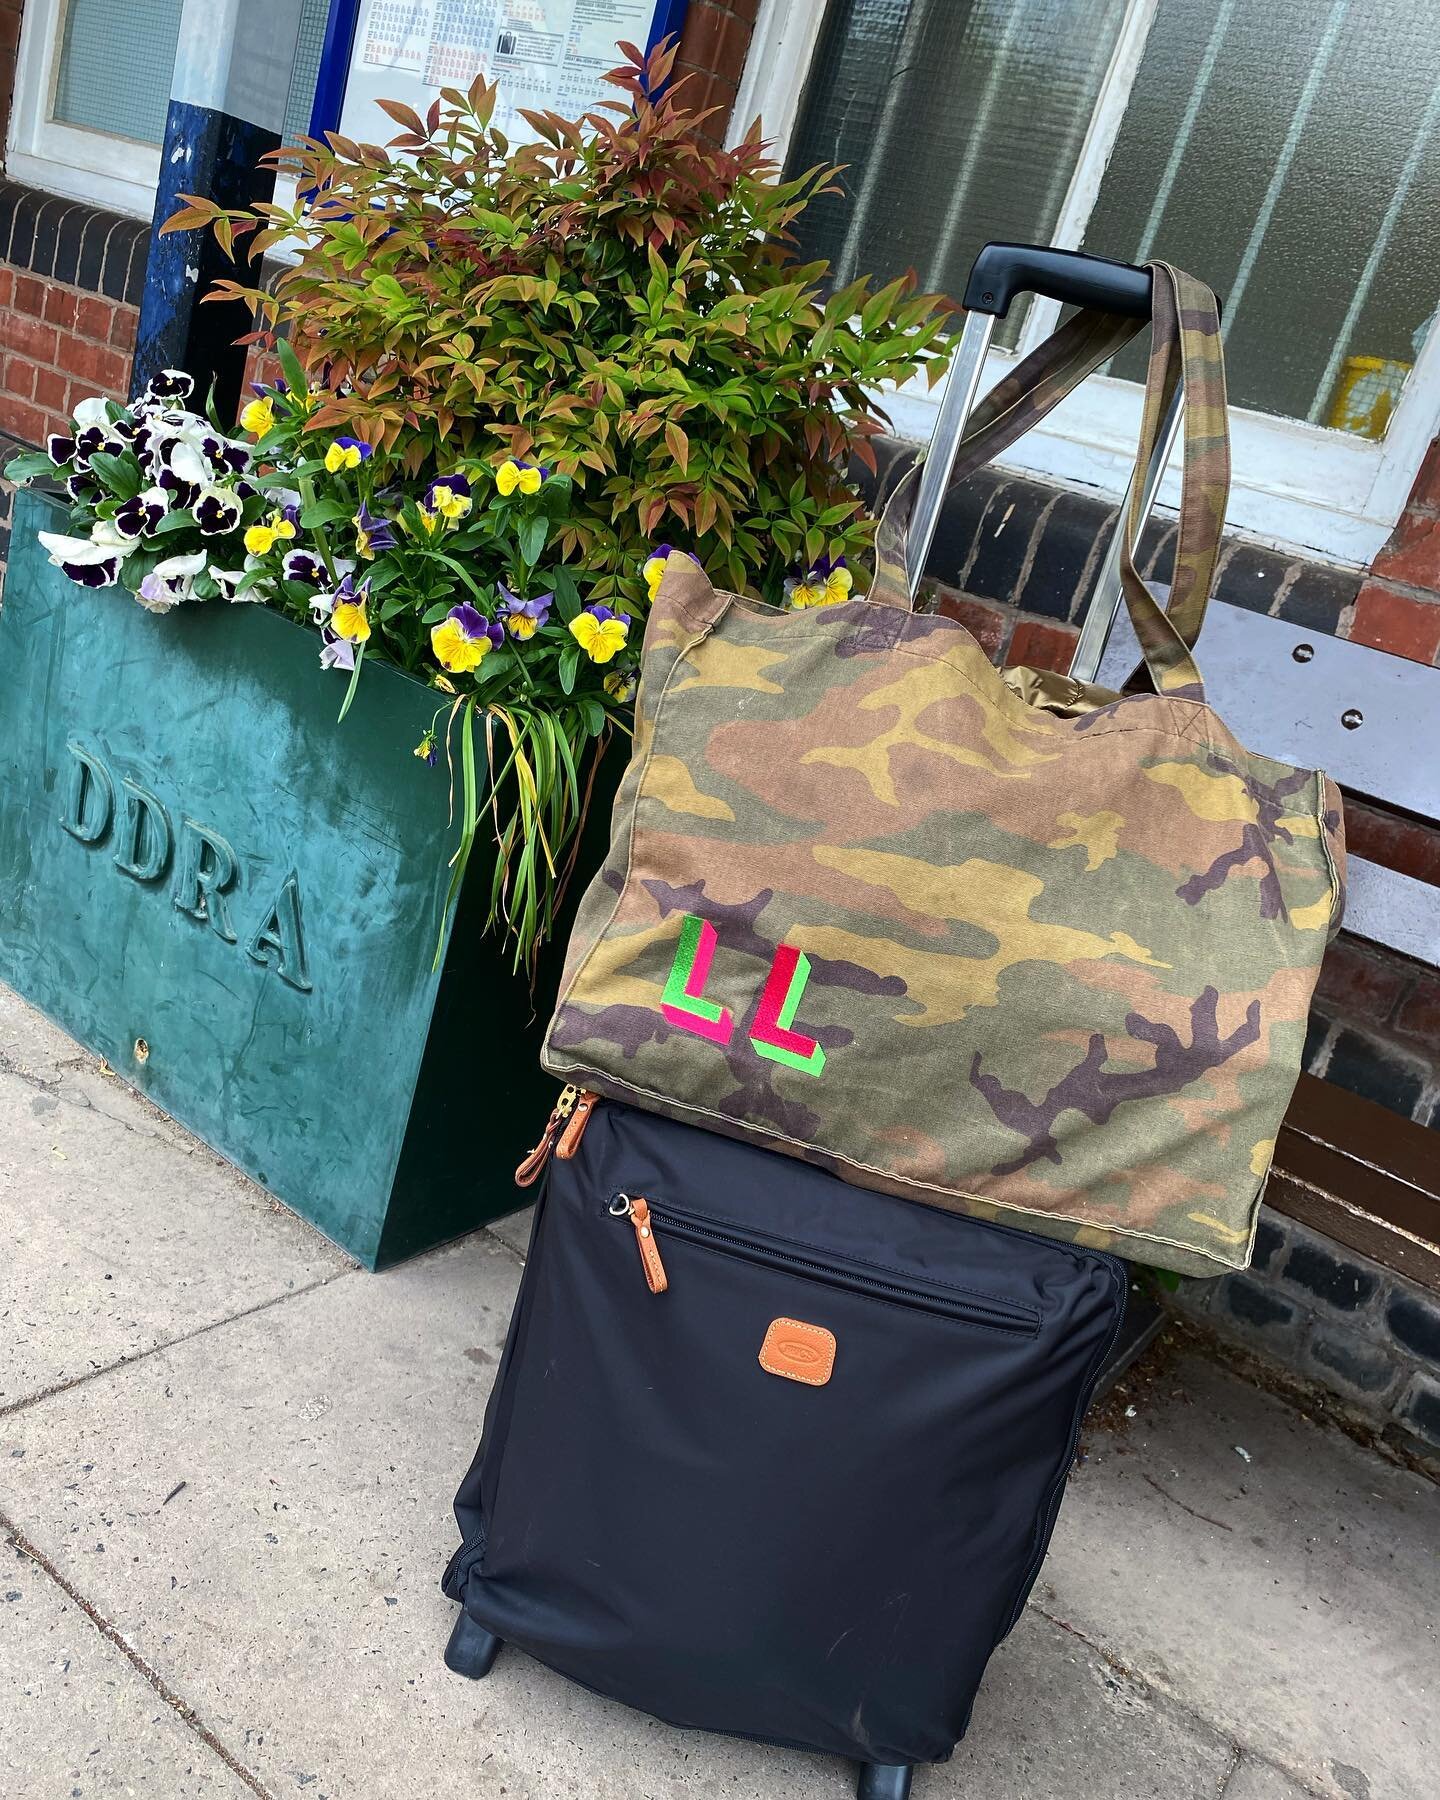 London bound 🚂 with essential jumbo bag packed and ready #camojumbobag #personalisedbag #personalisedembroidery